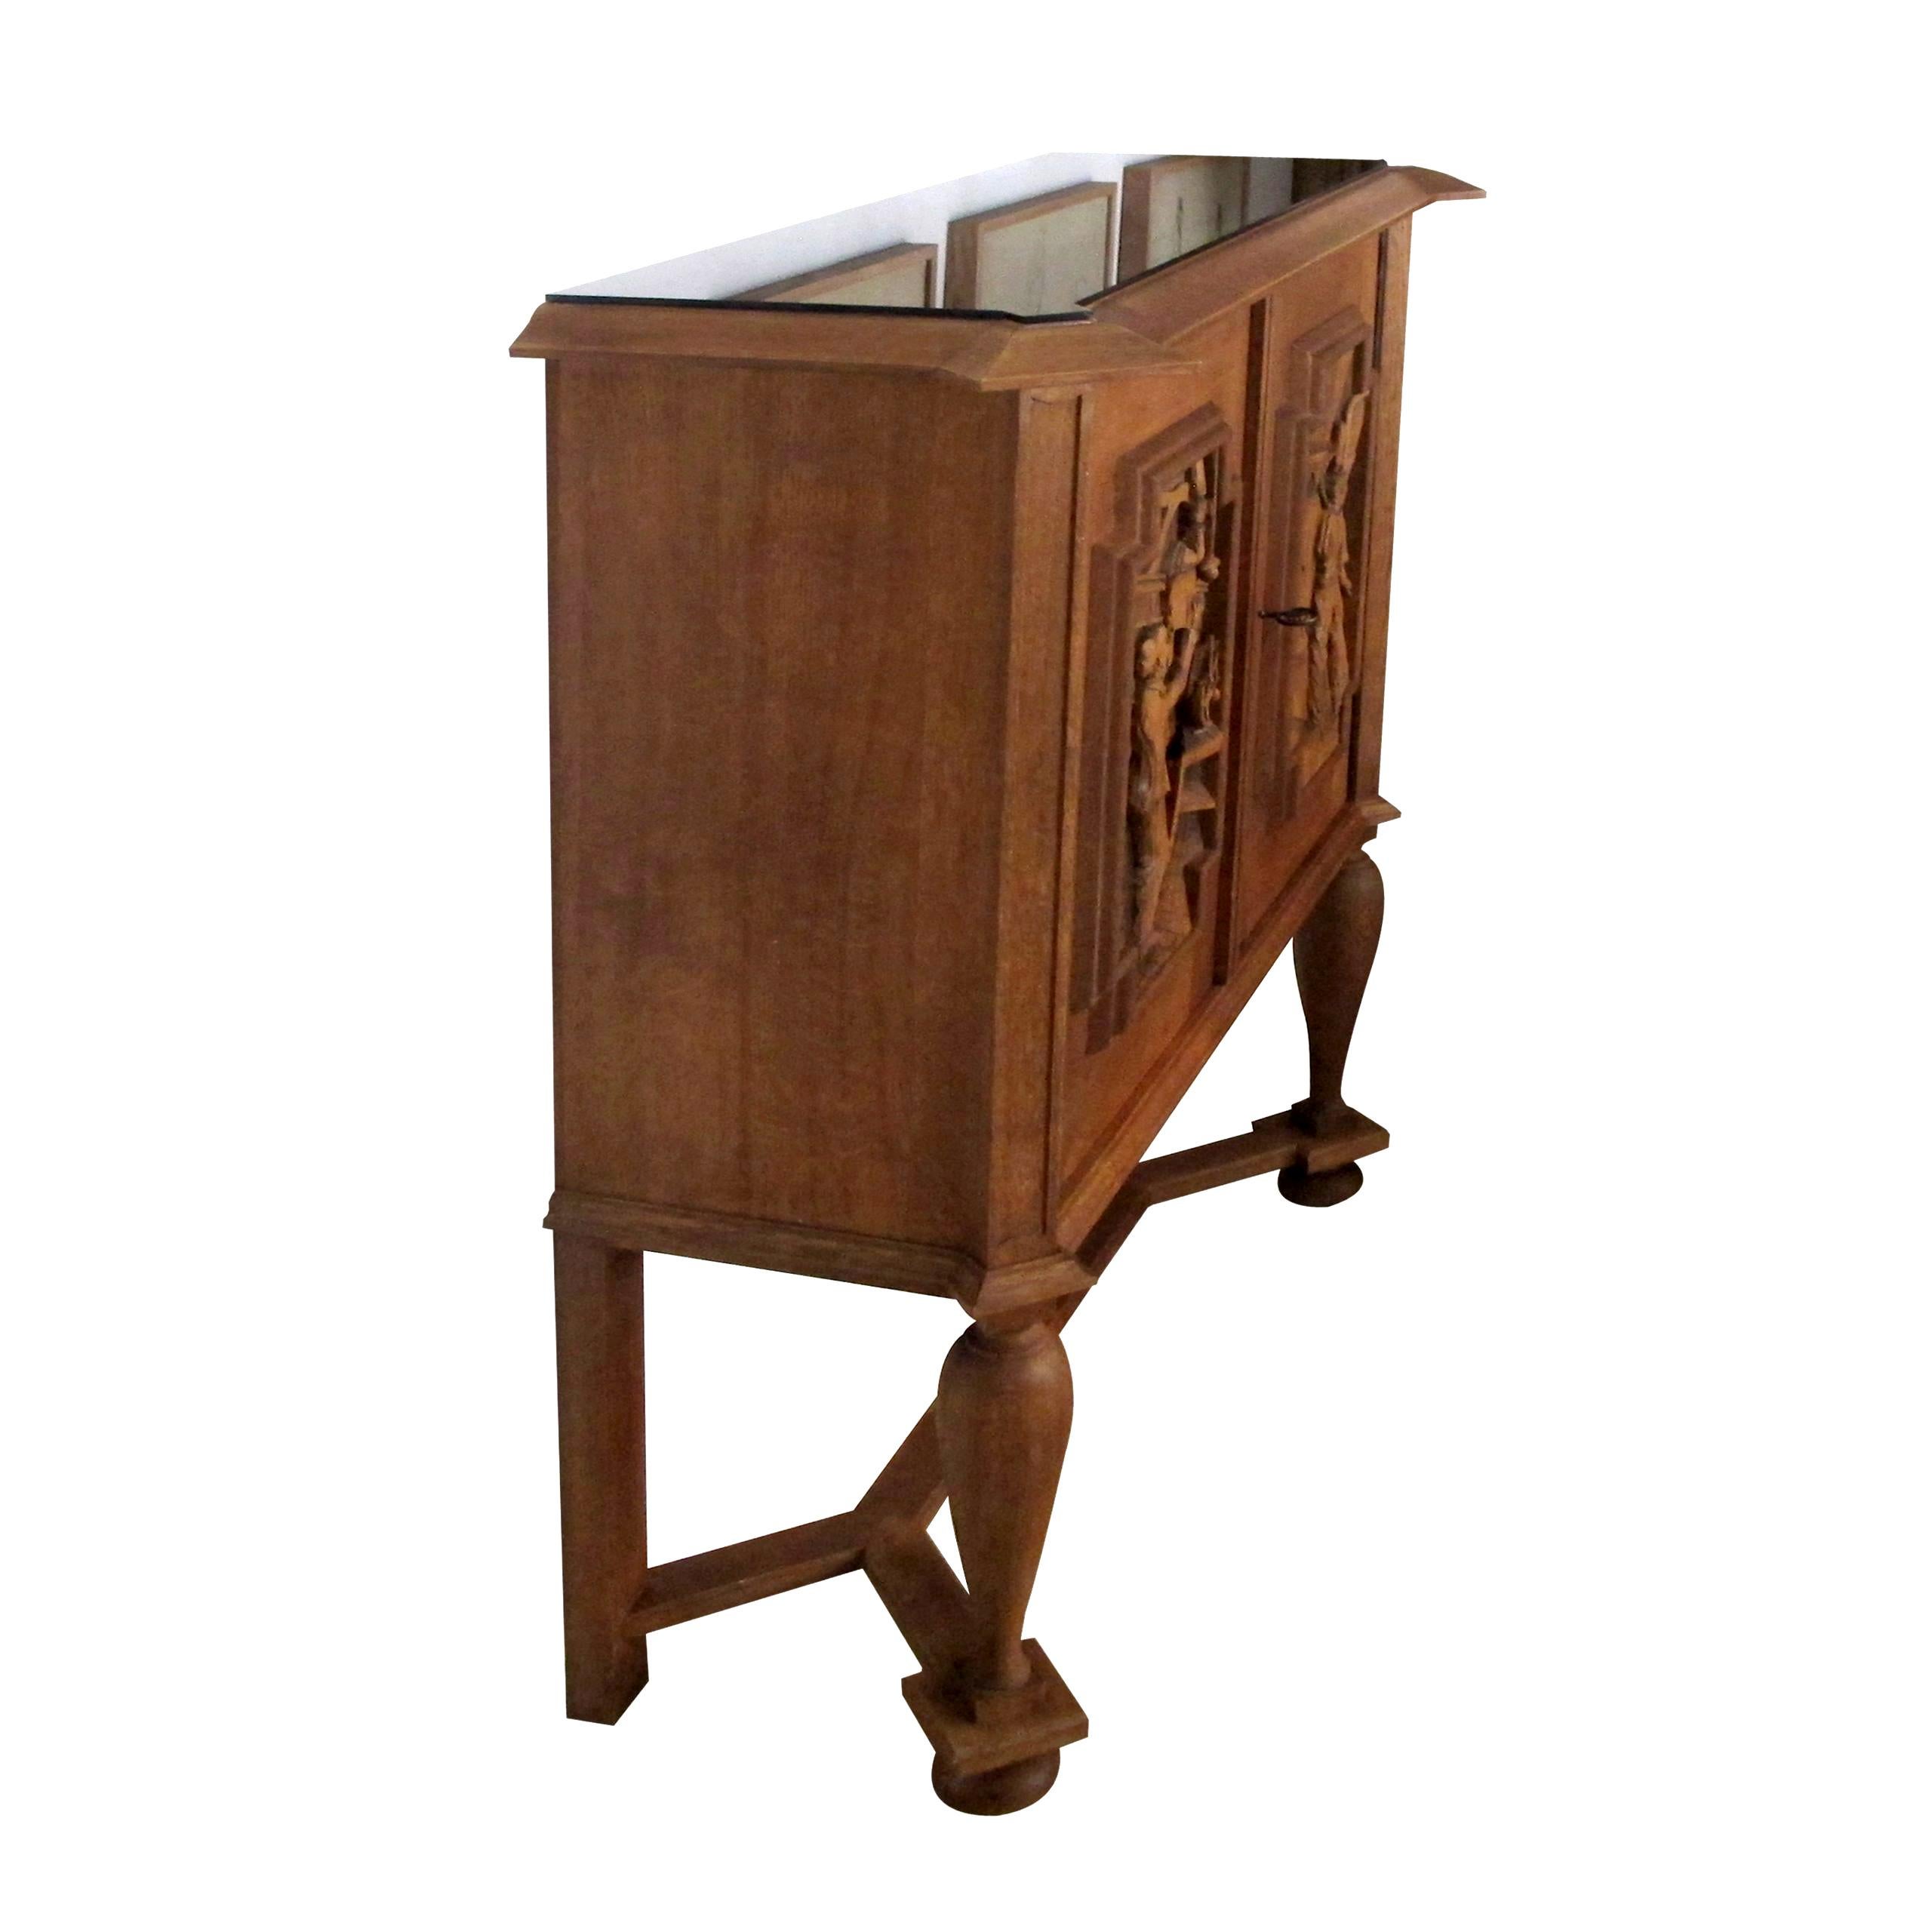 A signed and dated 1946 oak cabinet with beautifully carved doors by E. Hallanvaara with a black glass top and adjustable shelving. The cabinet was gifted to a paper mill worker, Ing. Hans Honauer for his 50th birthday by his colleague workers. The